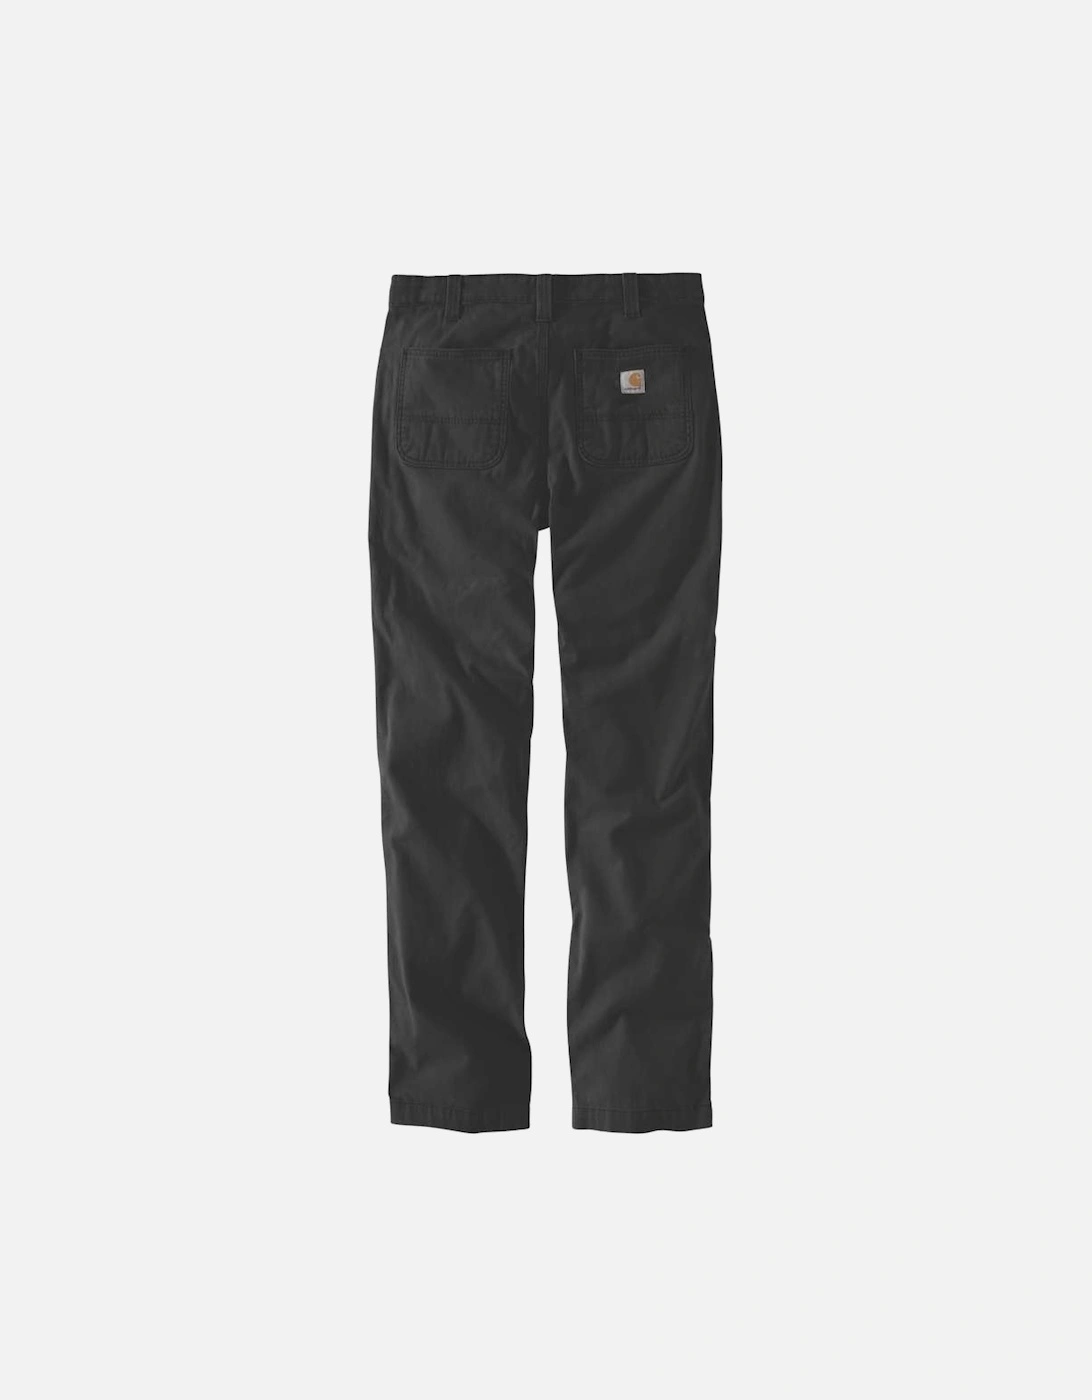 Carhartt Mens Rigby Straight fit Stretch Work Pants